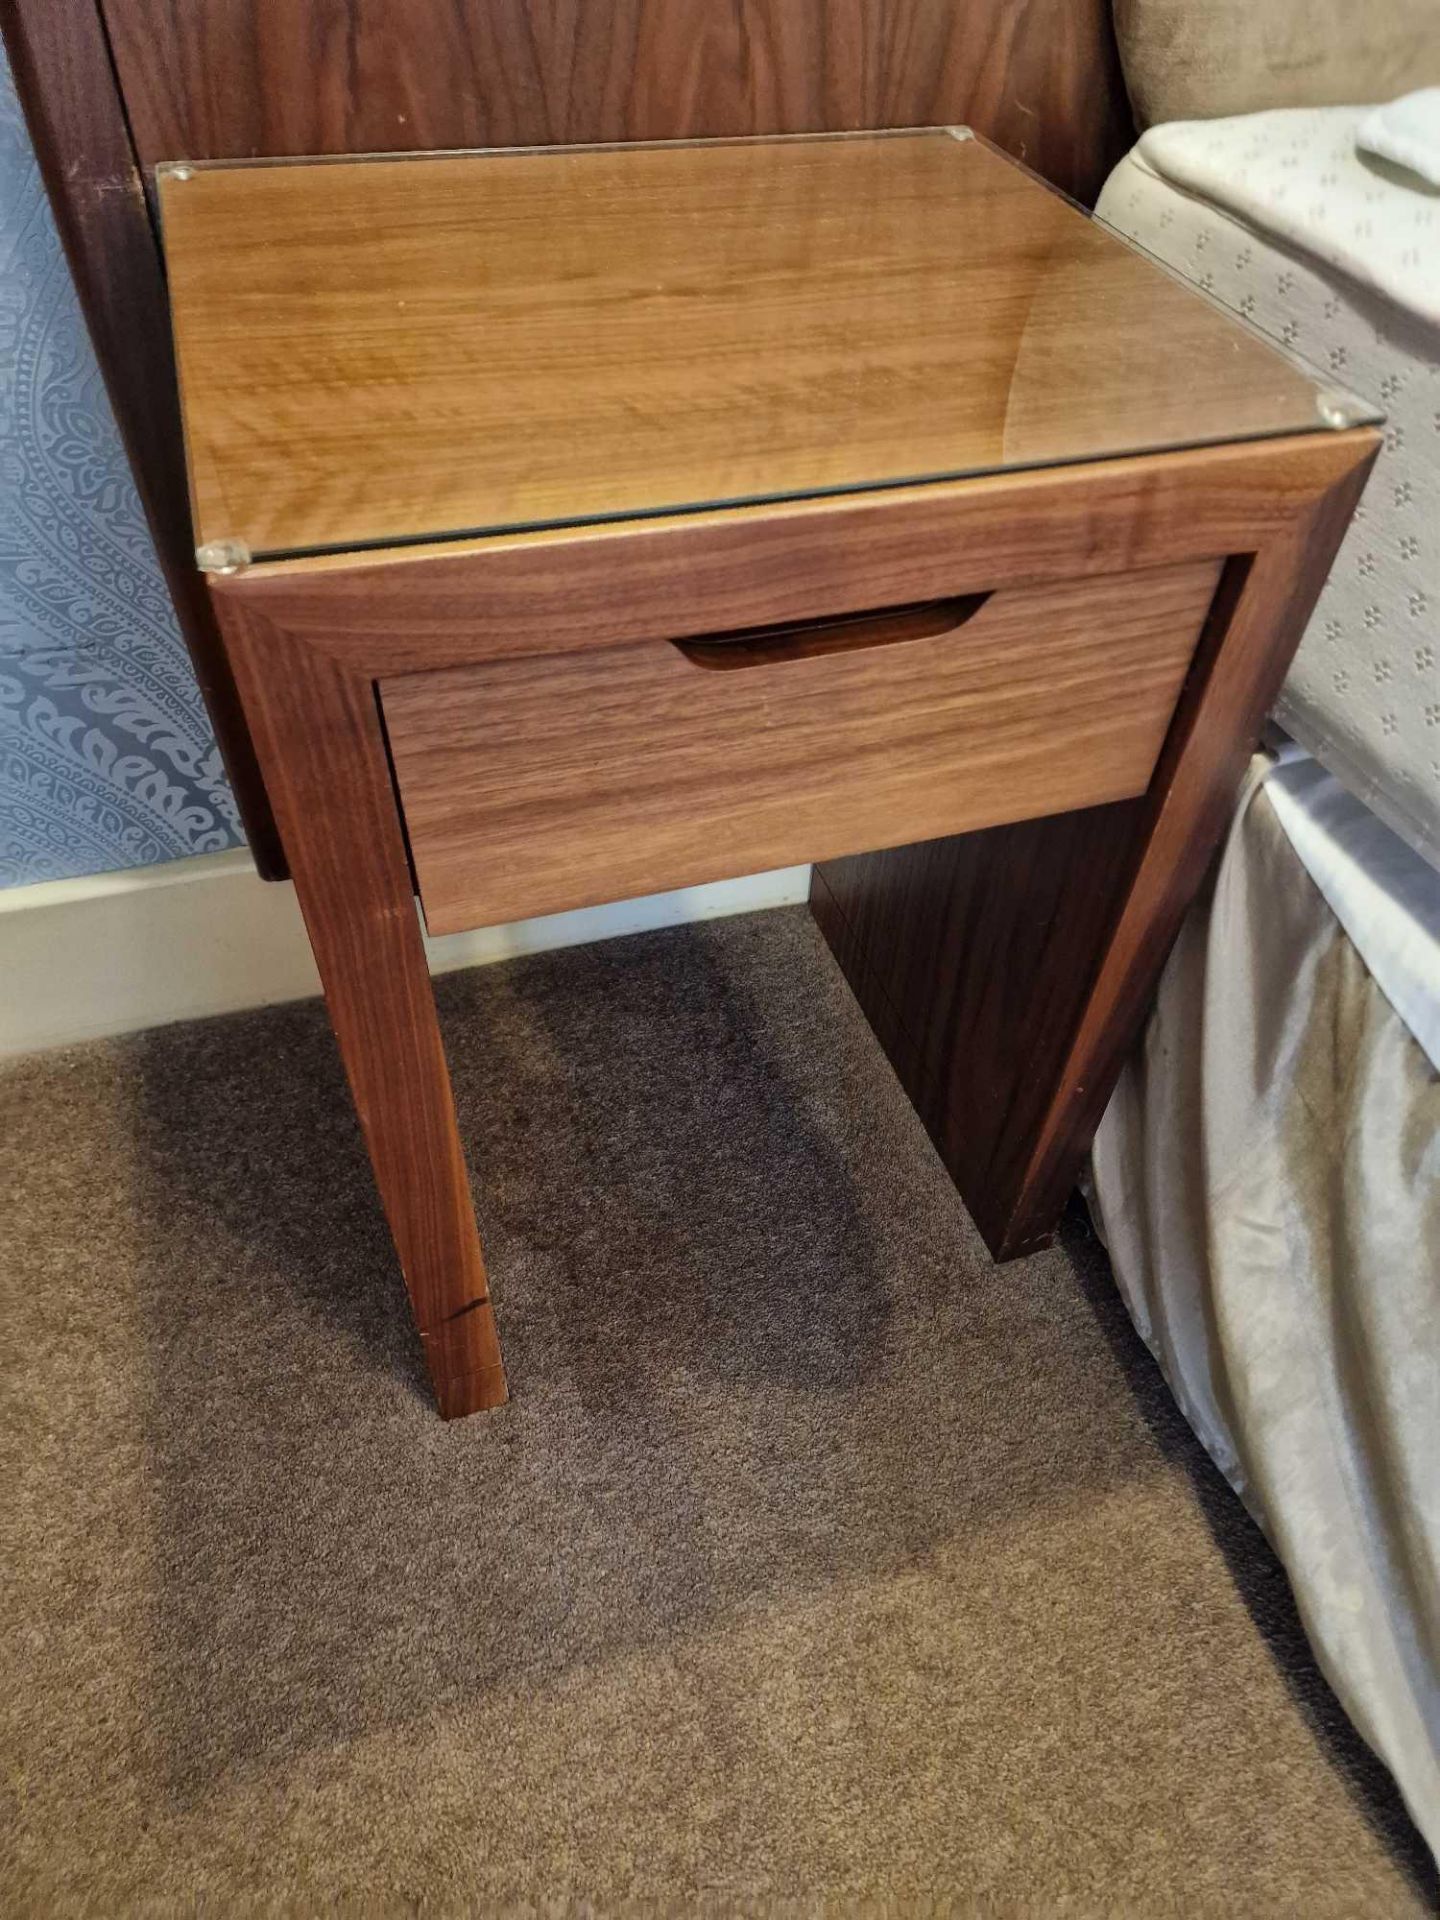 A pair of single drawer nightstands finished in dark stain cherrywood 40 x x35 x 56cm (